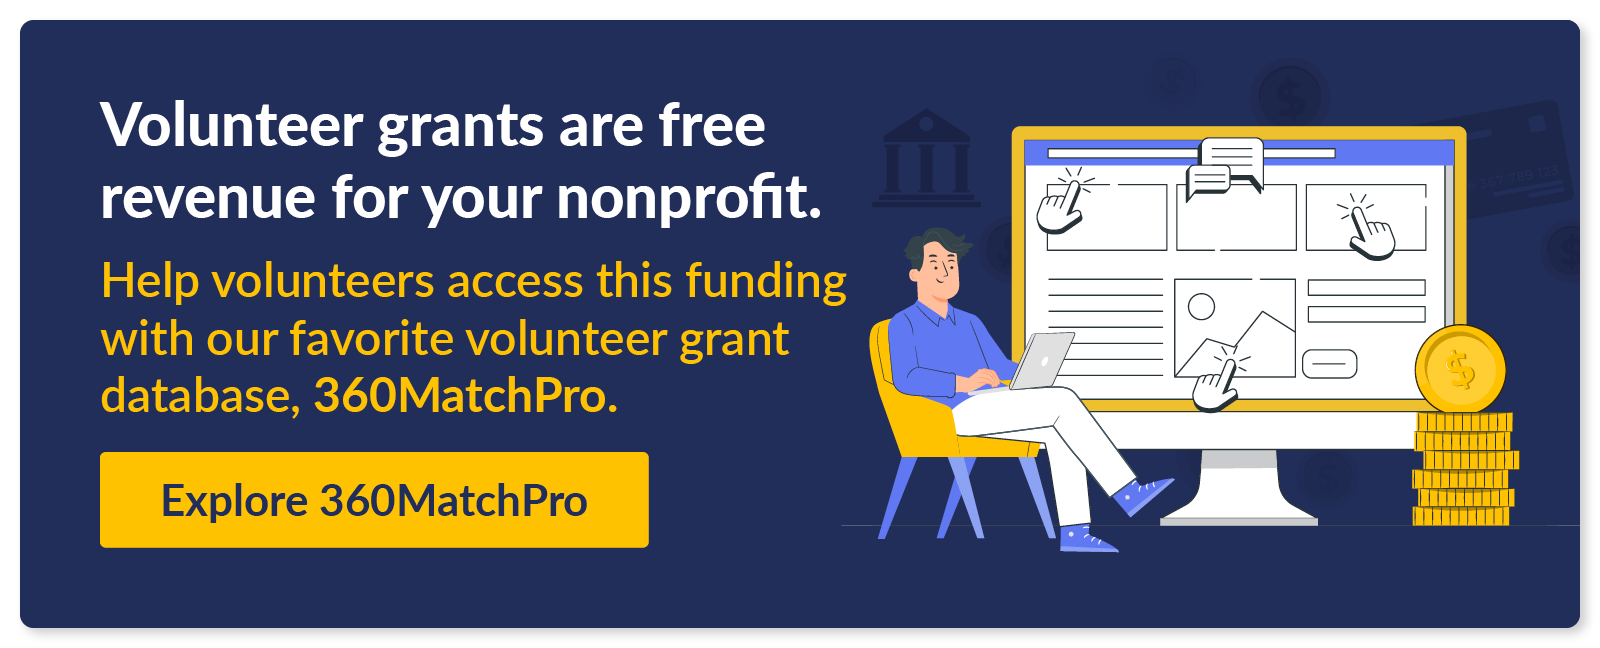 Volunteer grants are free revenue for your nonprofit. Help volunteers access this funding with our favorite volunteer grant database, 360MatchPro. Explore 360MatchPro.